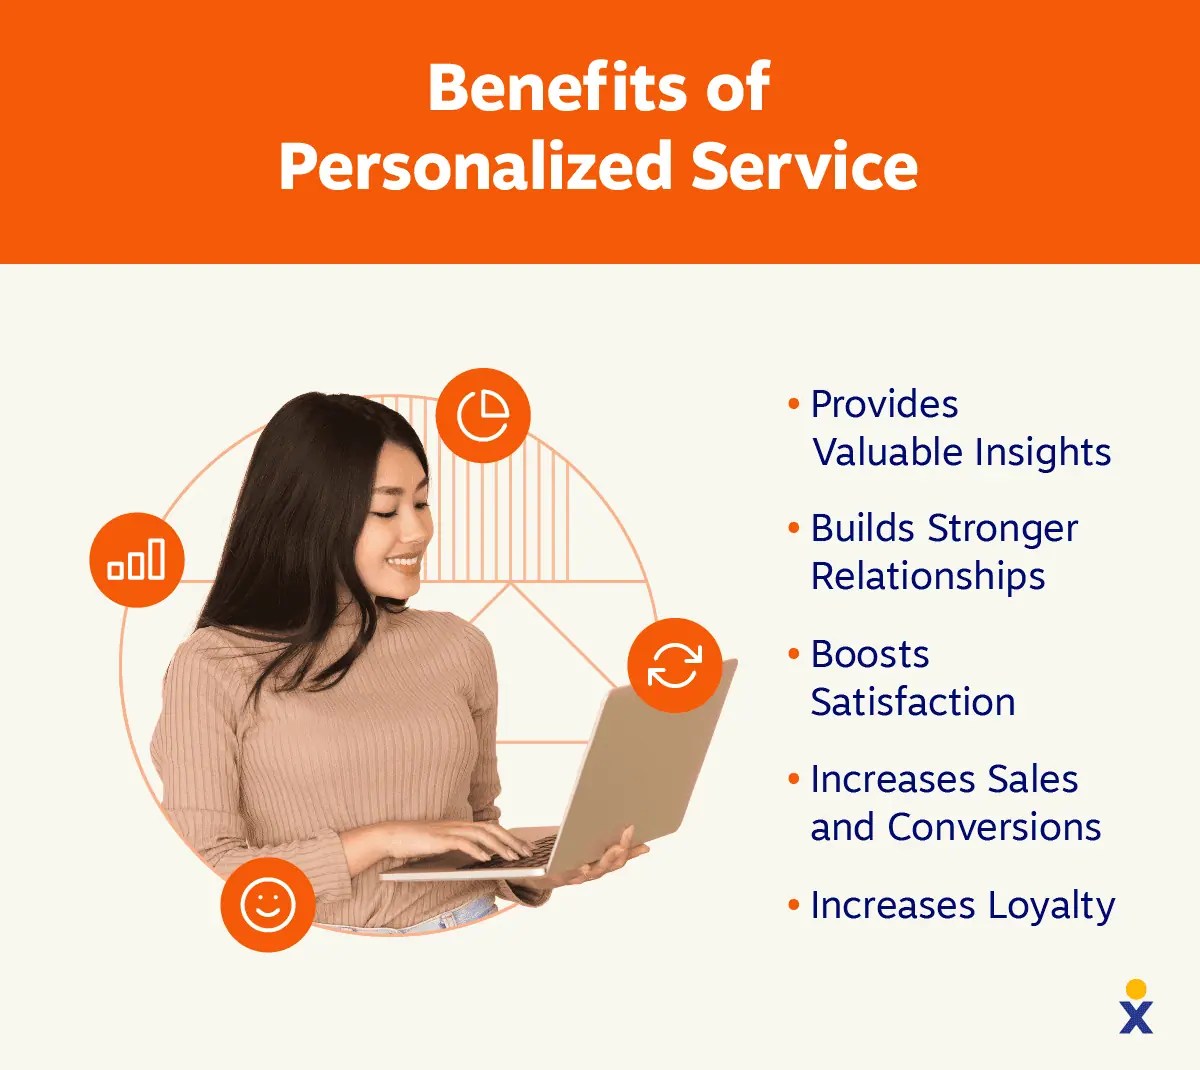 An agent uses a laptop with software to improve the customer experience and personalized customer service.